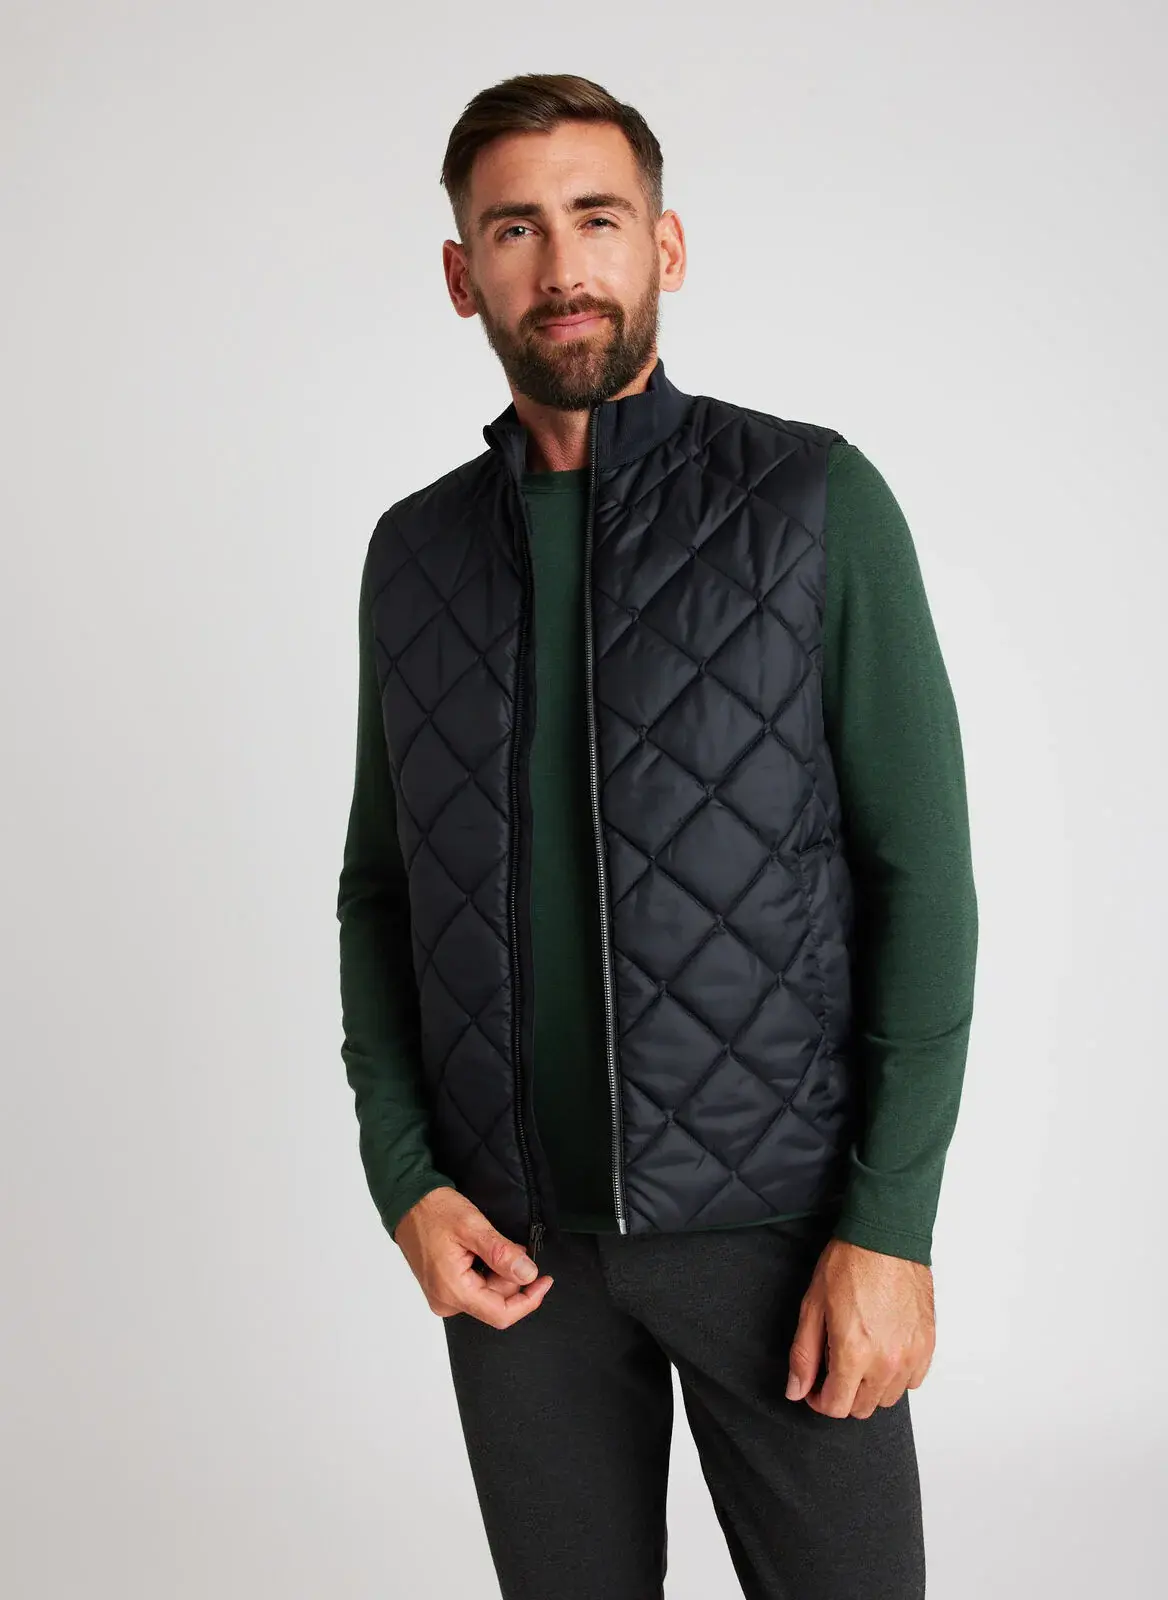 Kit And Ace Every Day Diamond Quilted Vest. 1